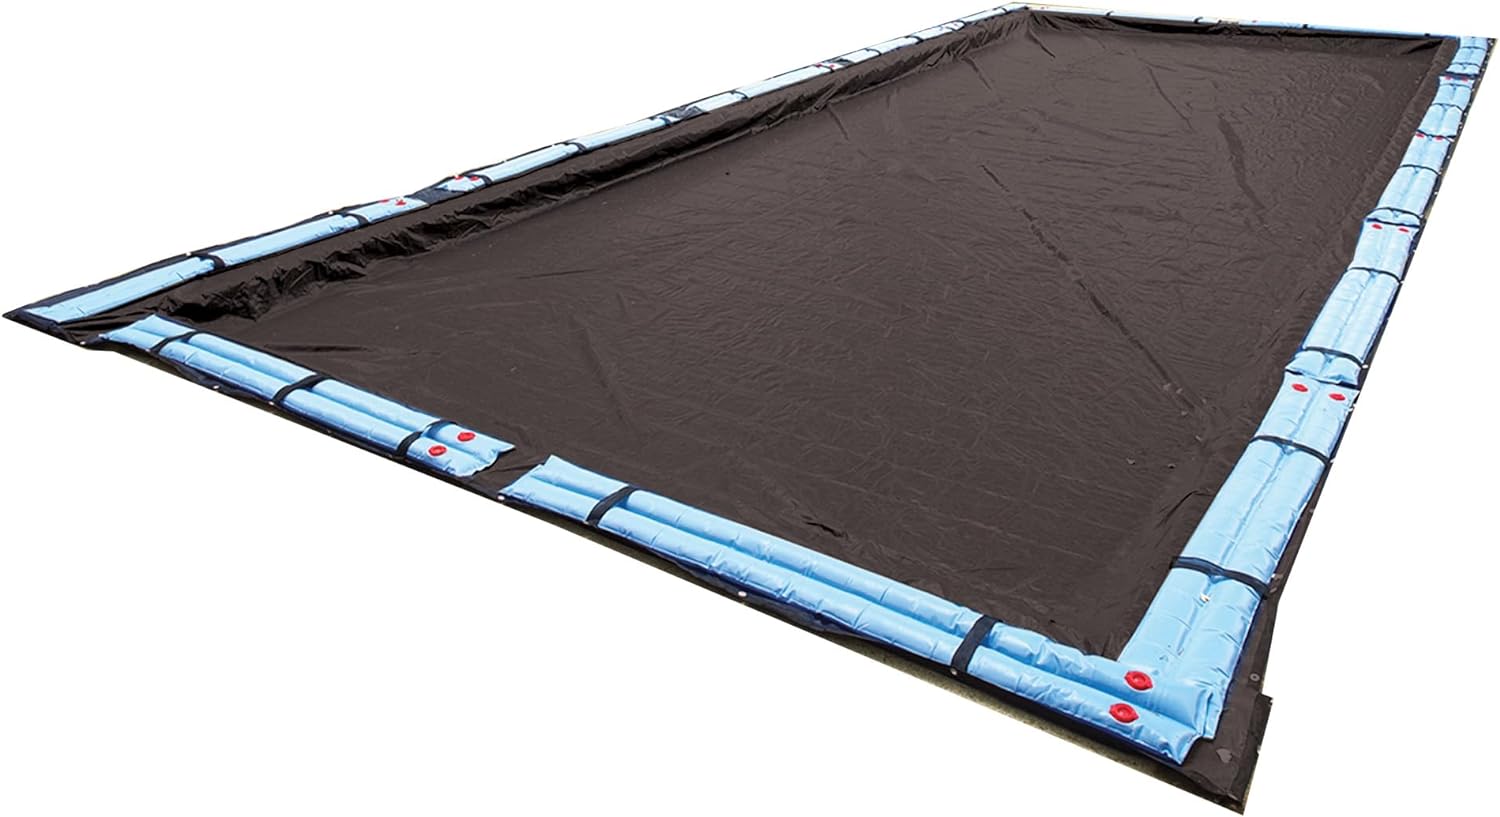 Royal 16' x 36' Pool Size - 21' x 41' Rect. Cover 10 Year Warranty